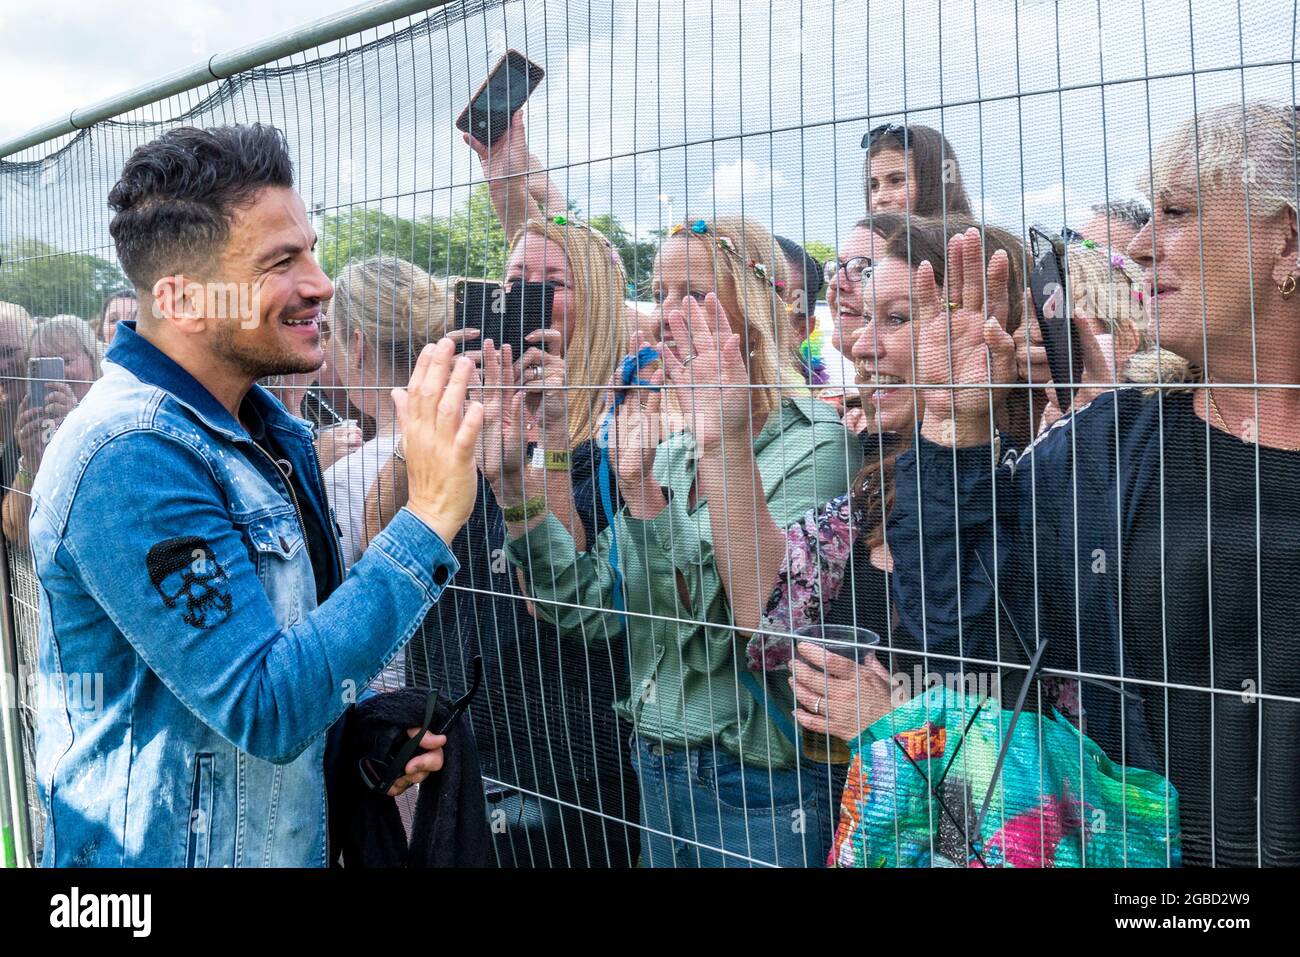 Peter Andre meeting adoring fans at the Fantasia music concert in Maldon, Essex, UK soon after lifting of COVID restrictions. Separated by fence Stock Photo